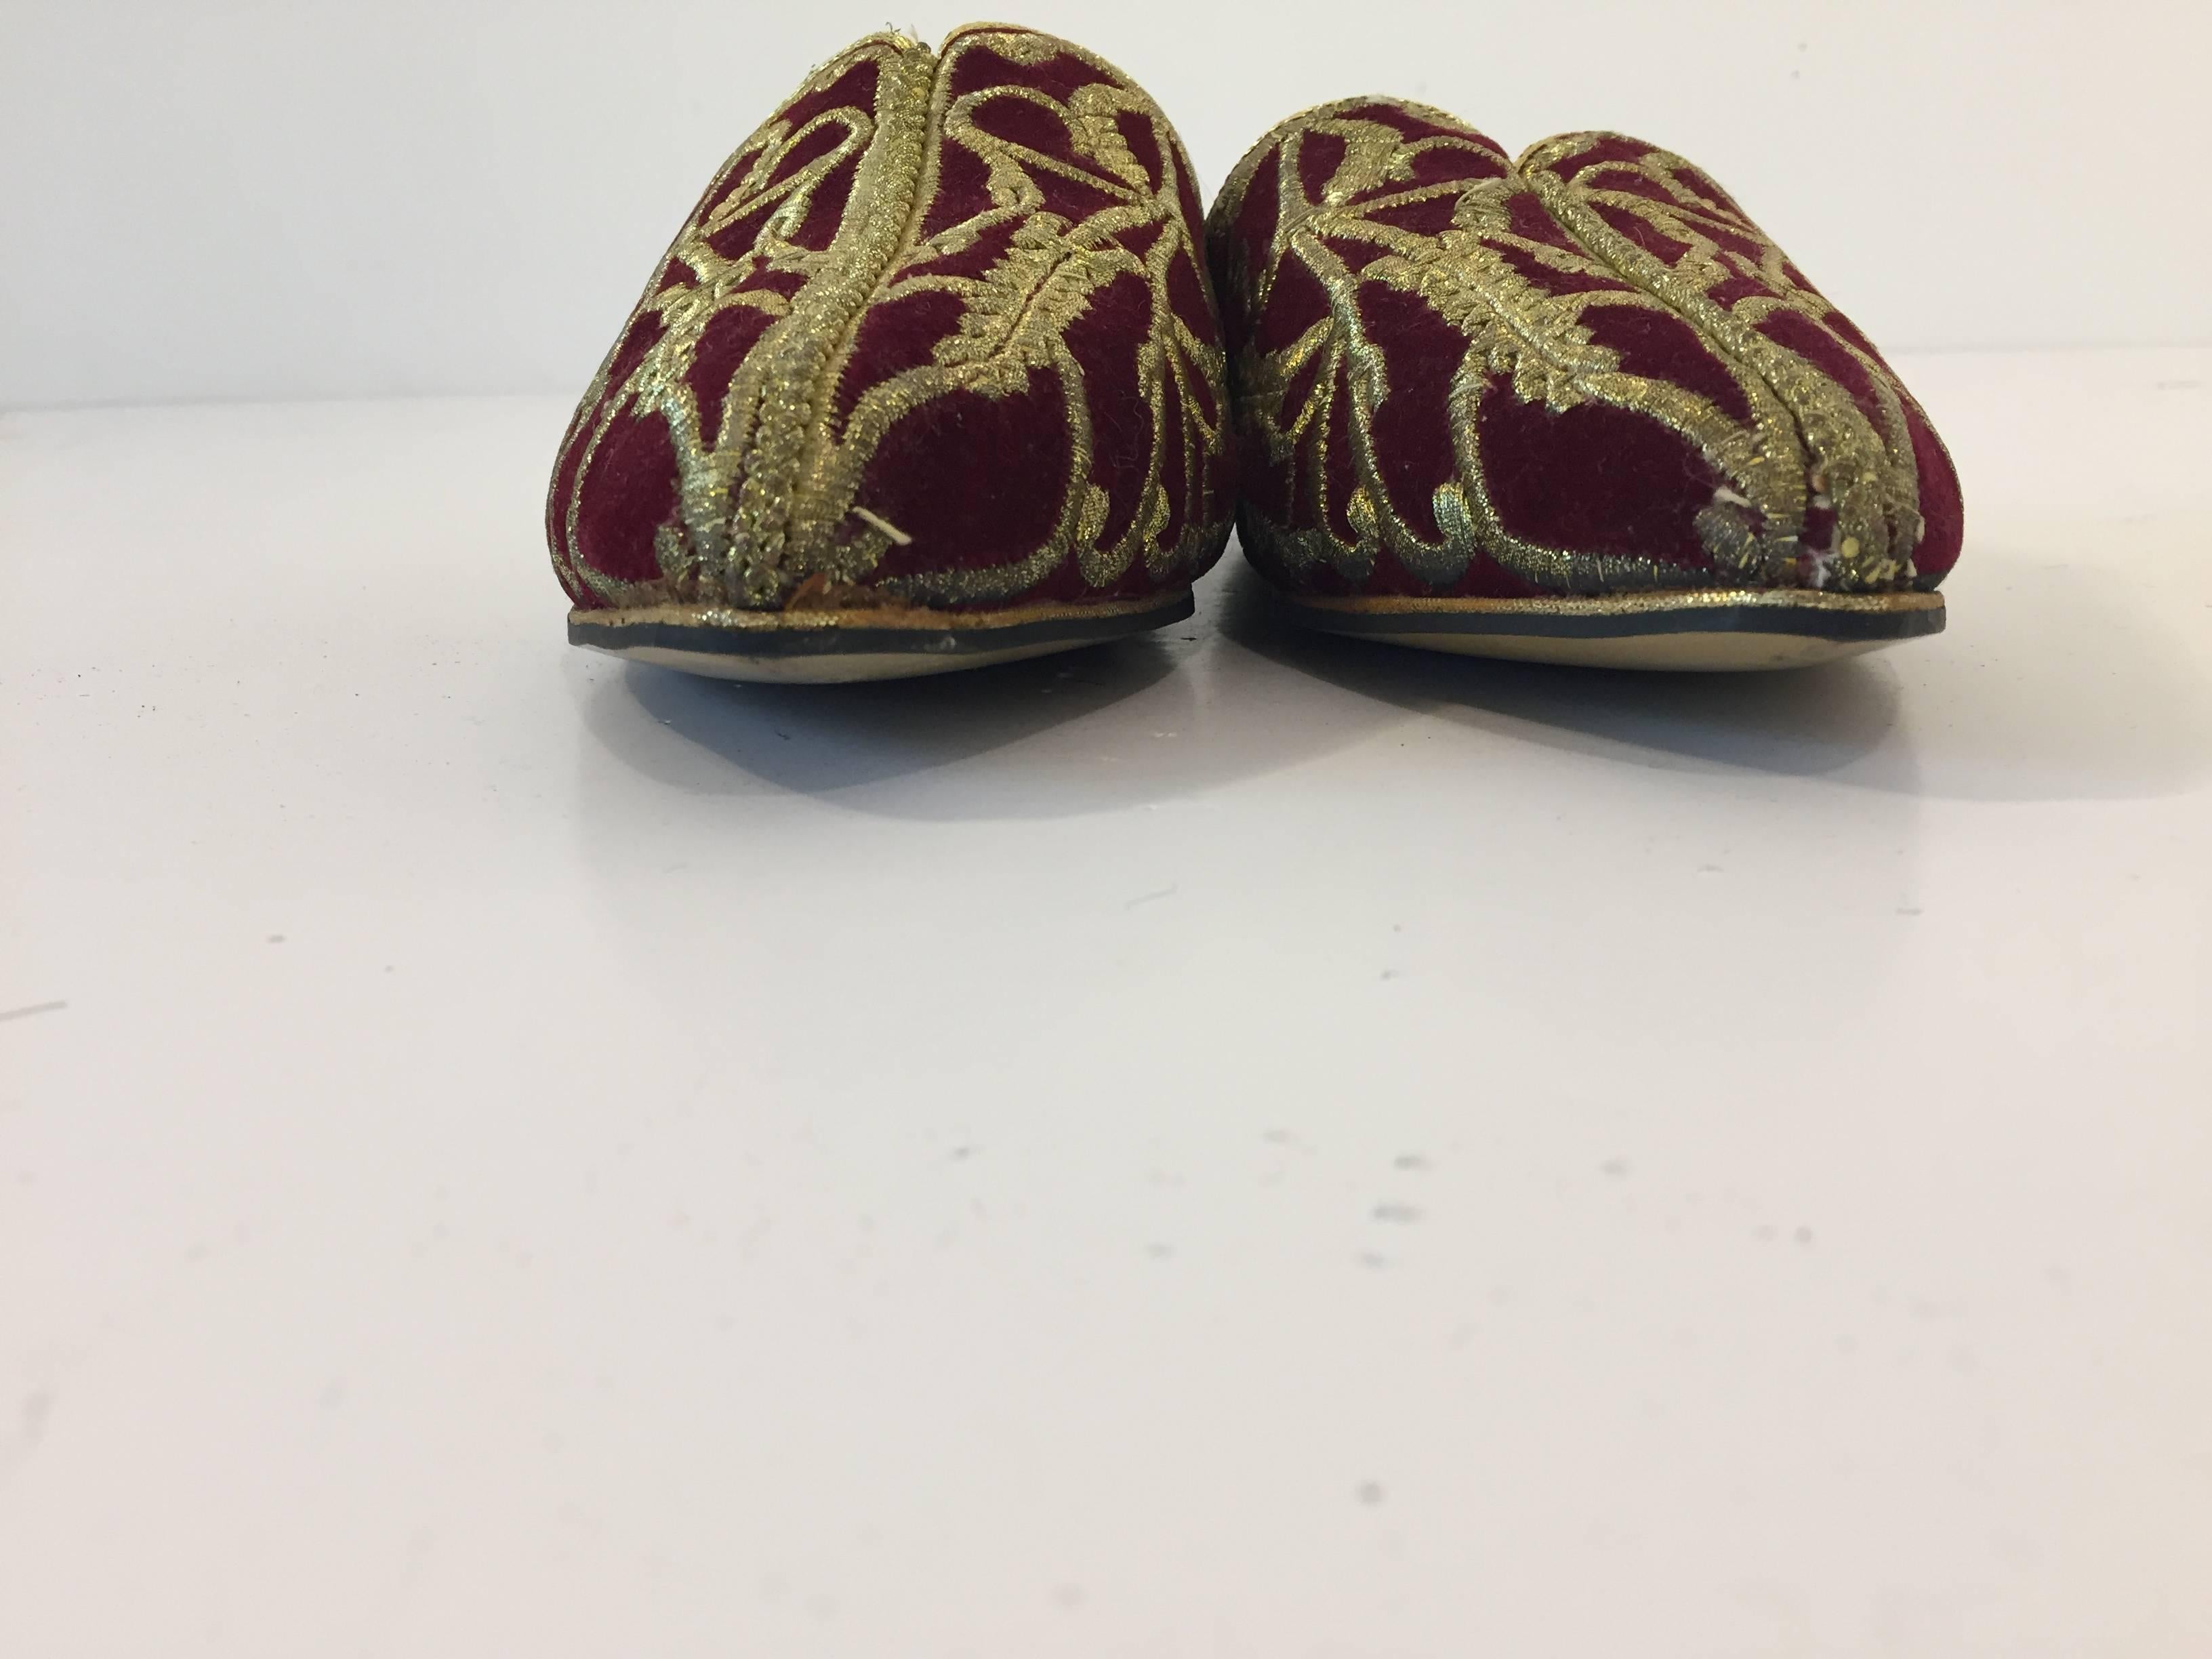 20th Century Turkish Velvet Embroidered with Gold Metallic Thread Slippers Shoes For Sale